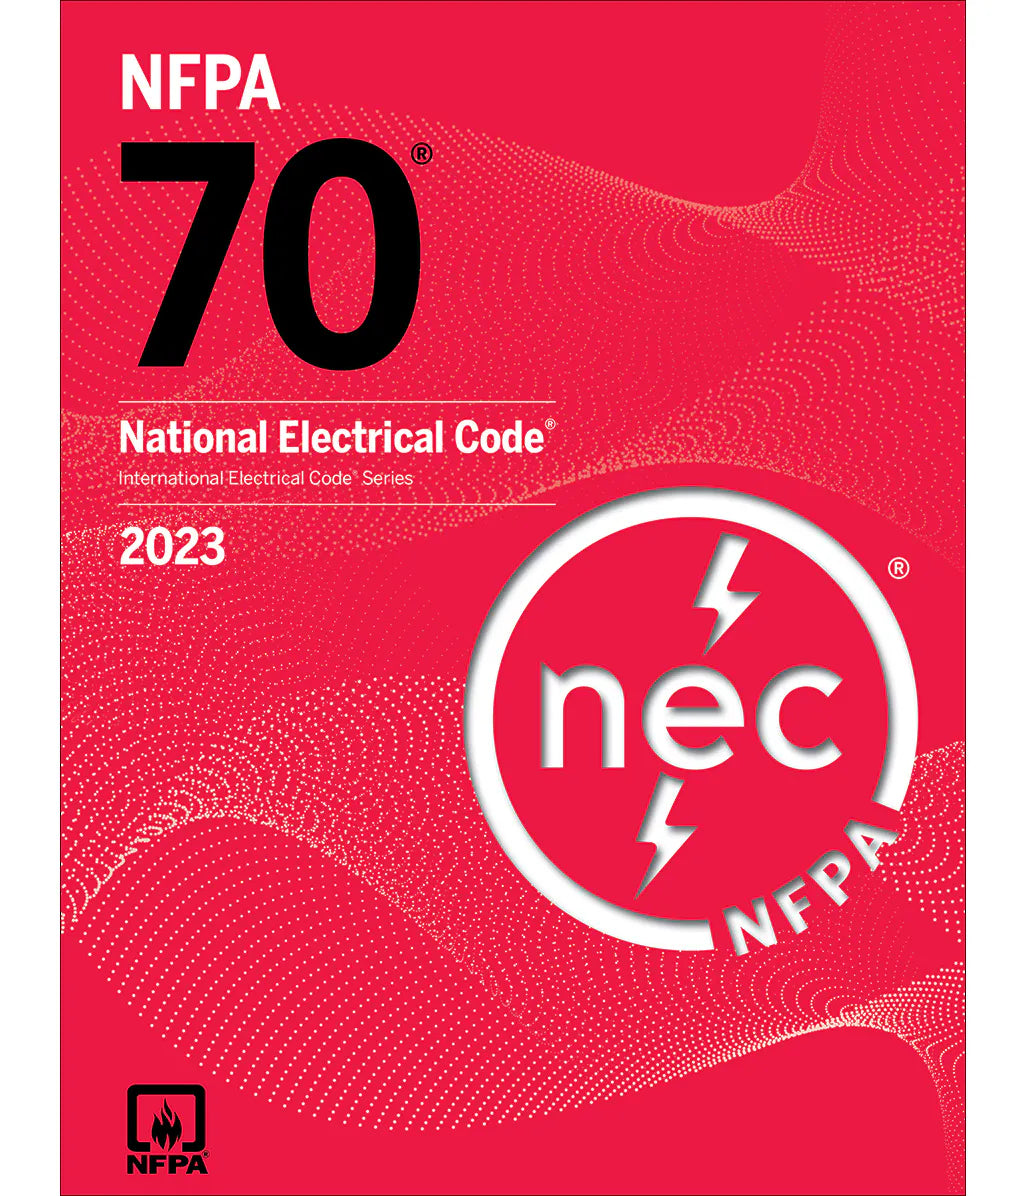 NFPA 70: National Electrical Code (NEC), 2023 Edition